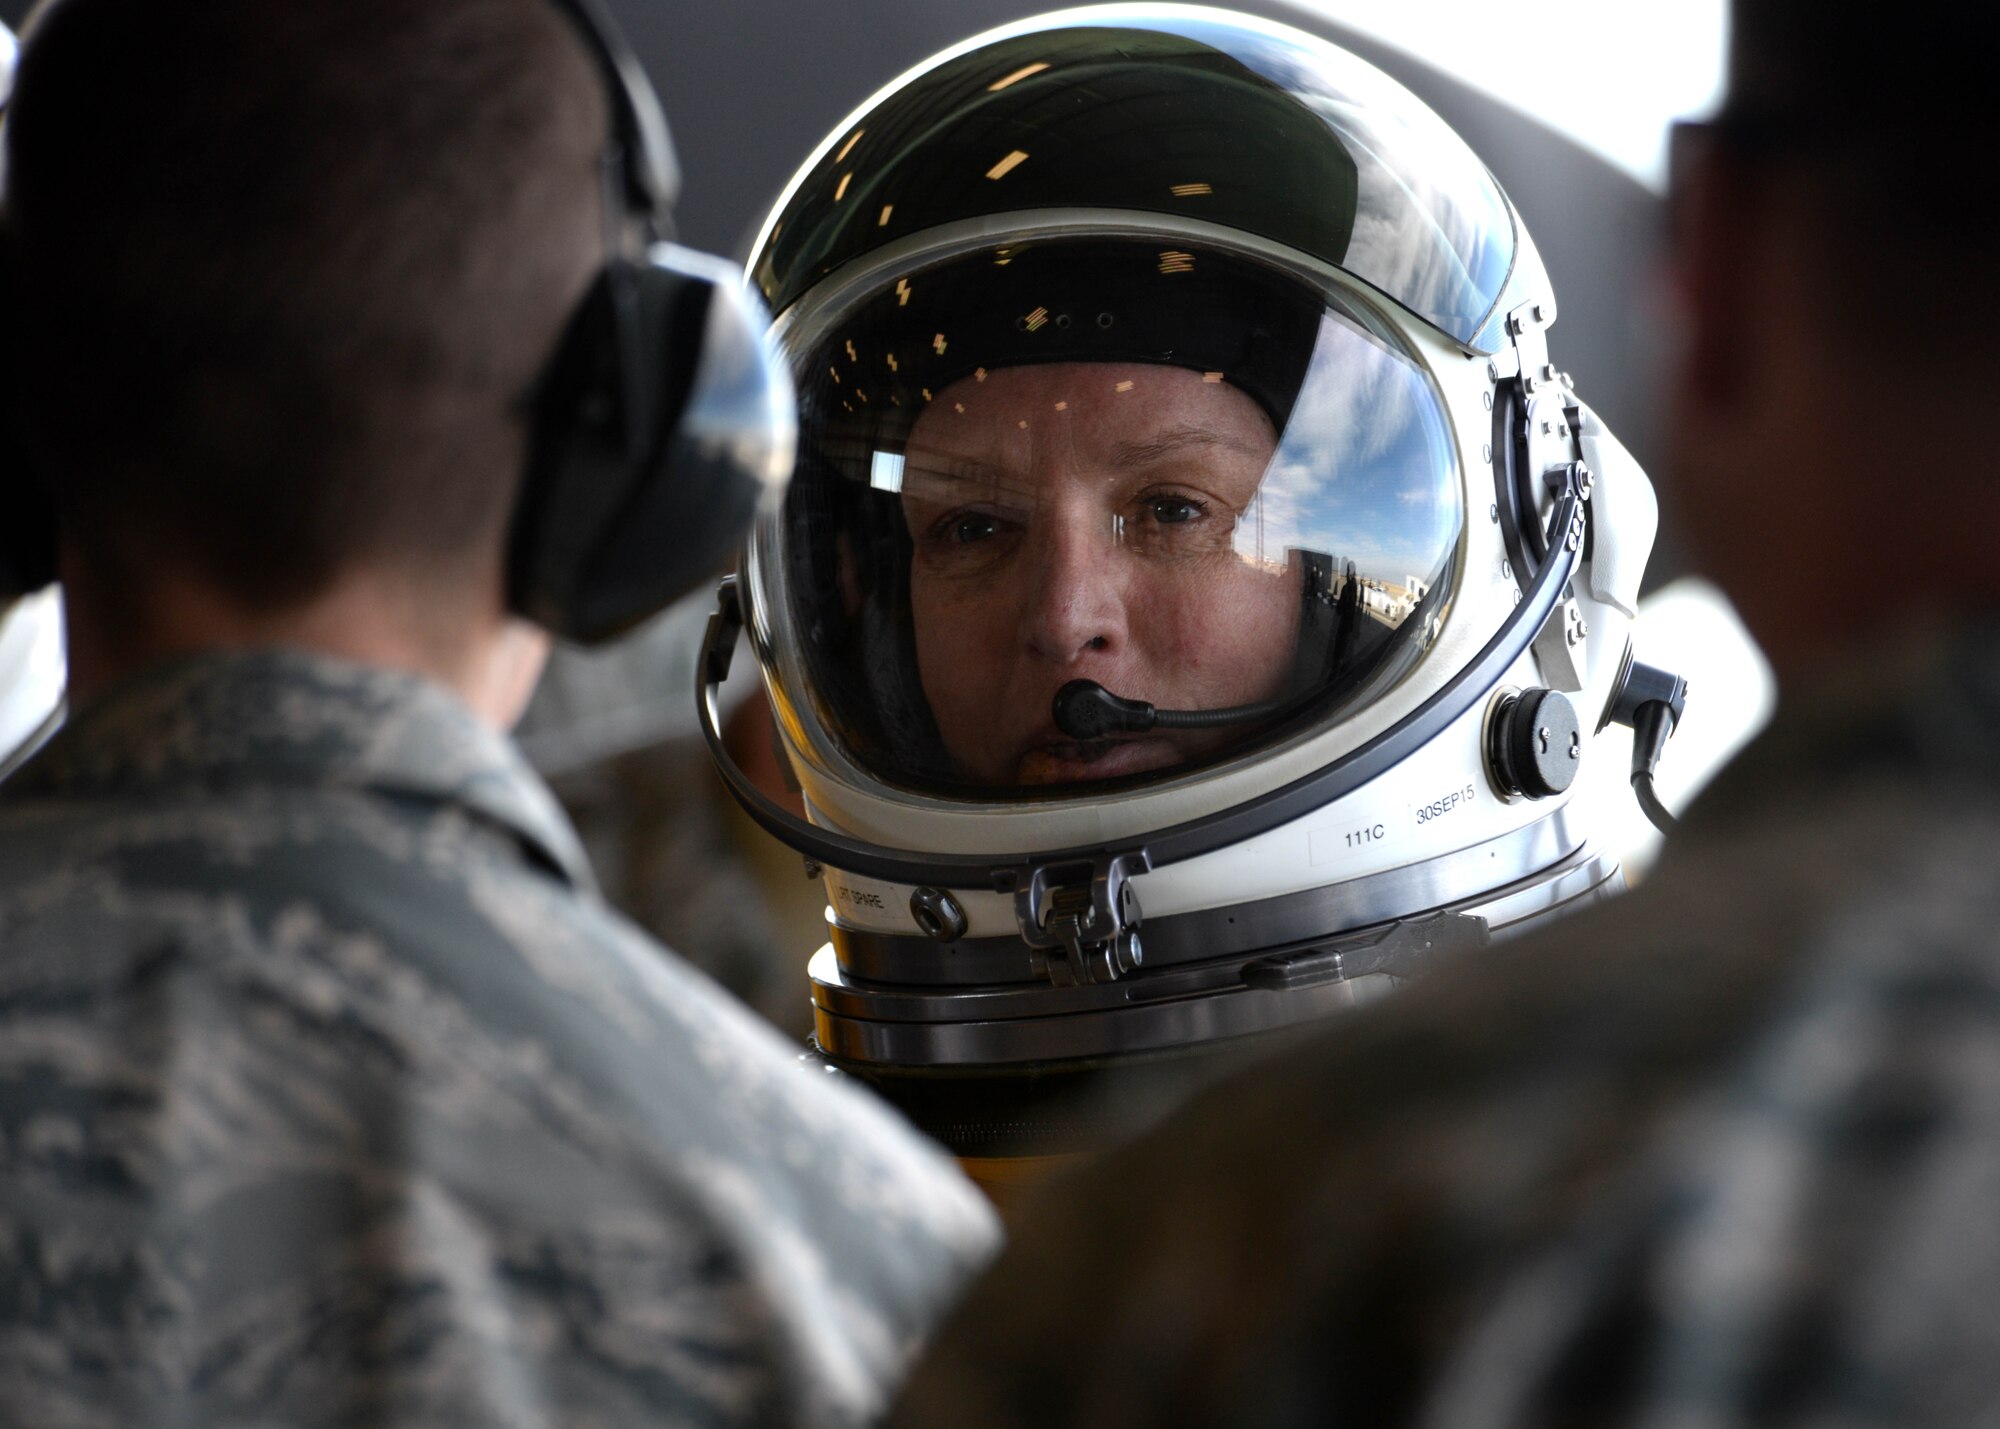 Secretary of the Air Force Deborah Lee James shakes hands with maintenance Airmen from the 9th Aircraft Maintenance Squadron before flying in a U-2S at Beale Air Force Base, Calif., Aug. 11, 2015. The specialized pressure suit allows U-2 pilots to safely fly at altitudes reaching 70,000 feet. James visited Beale to receive a first-hand perspective of high-altitude intelligence, surveillance and reconnaissance from collection to dissemination. (U.S. Air Force photo/Airman 1st Class Ramon A. Adelan)